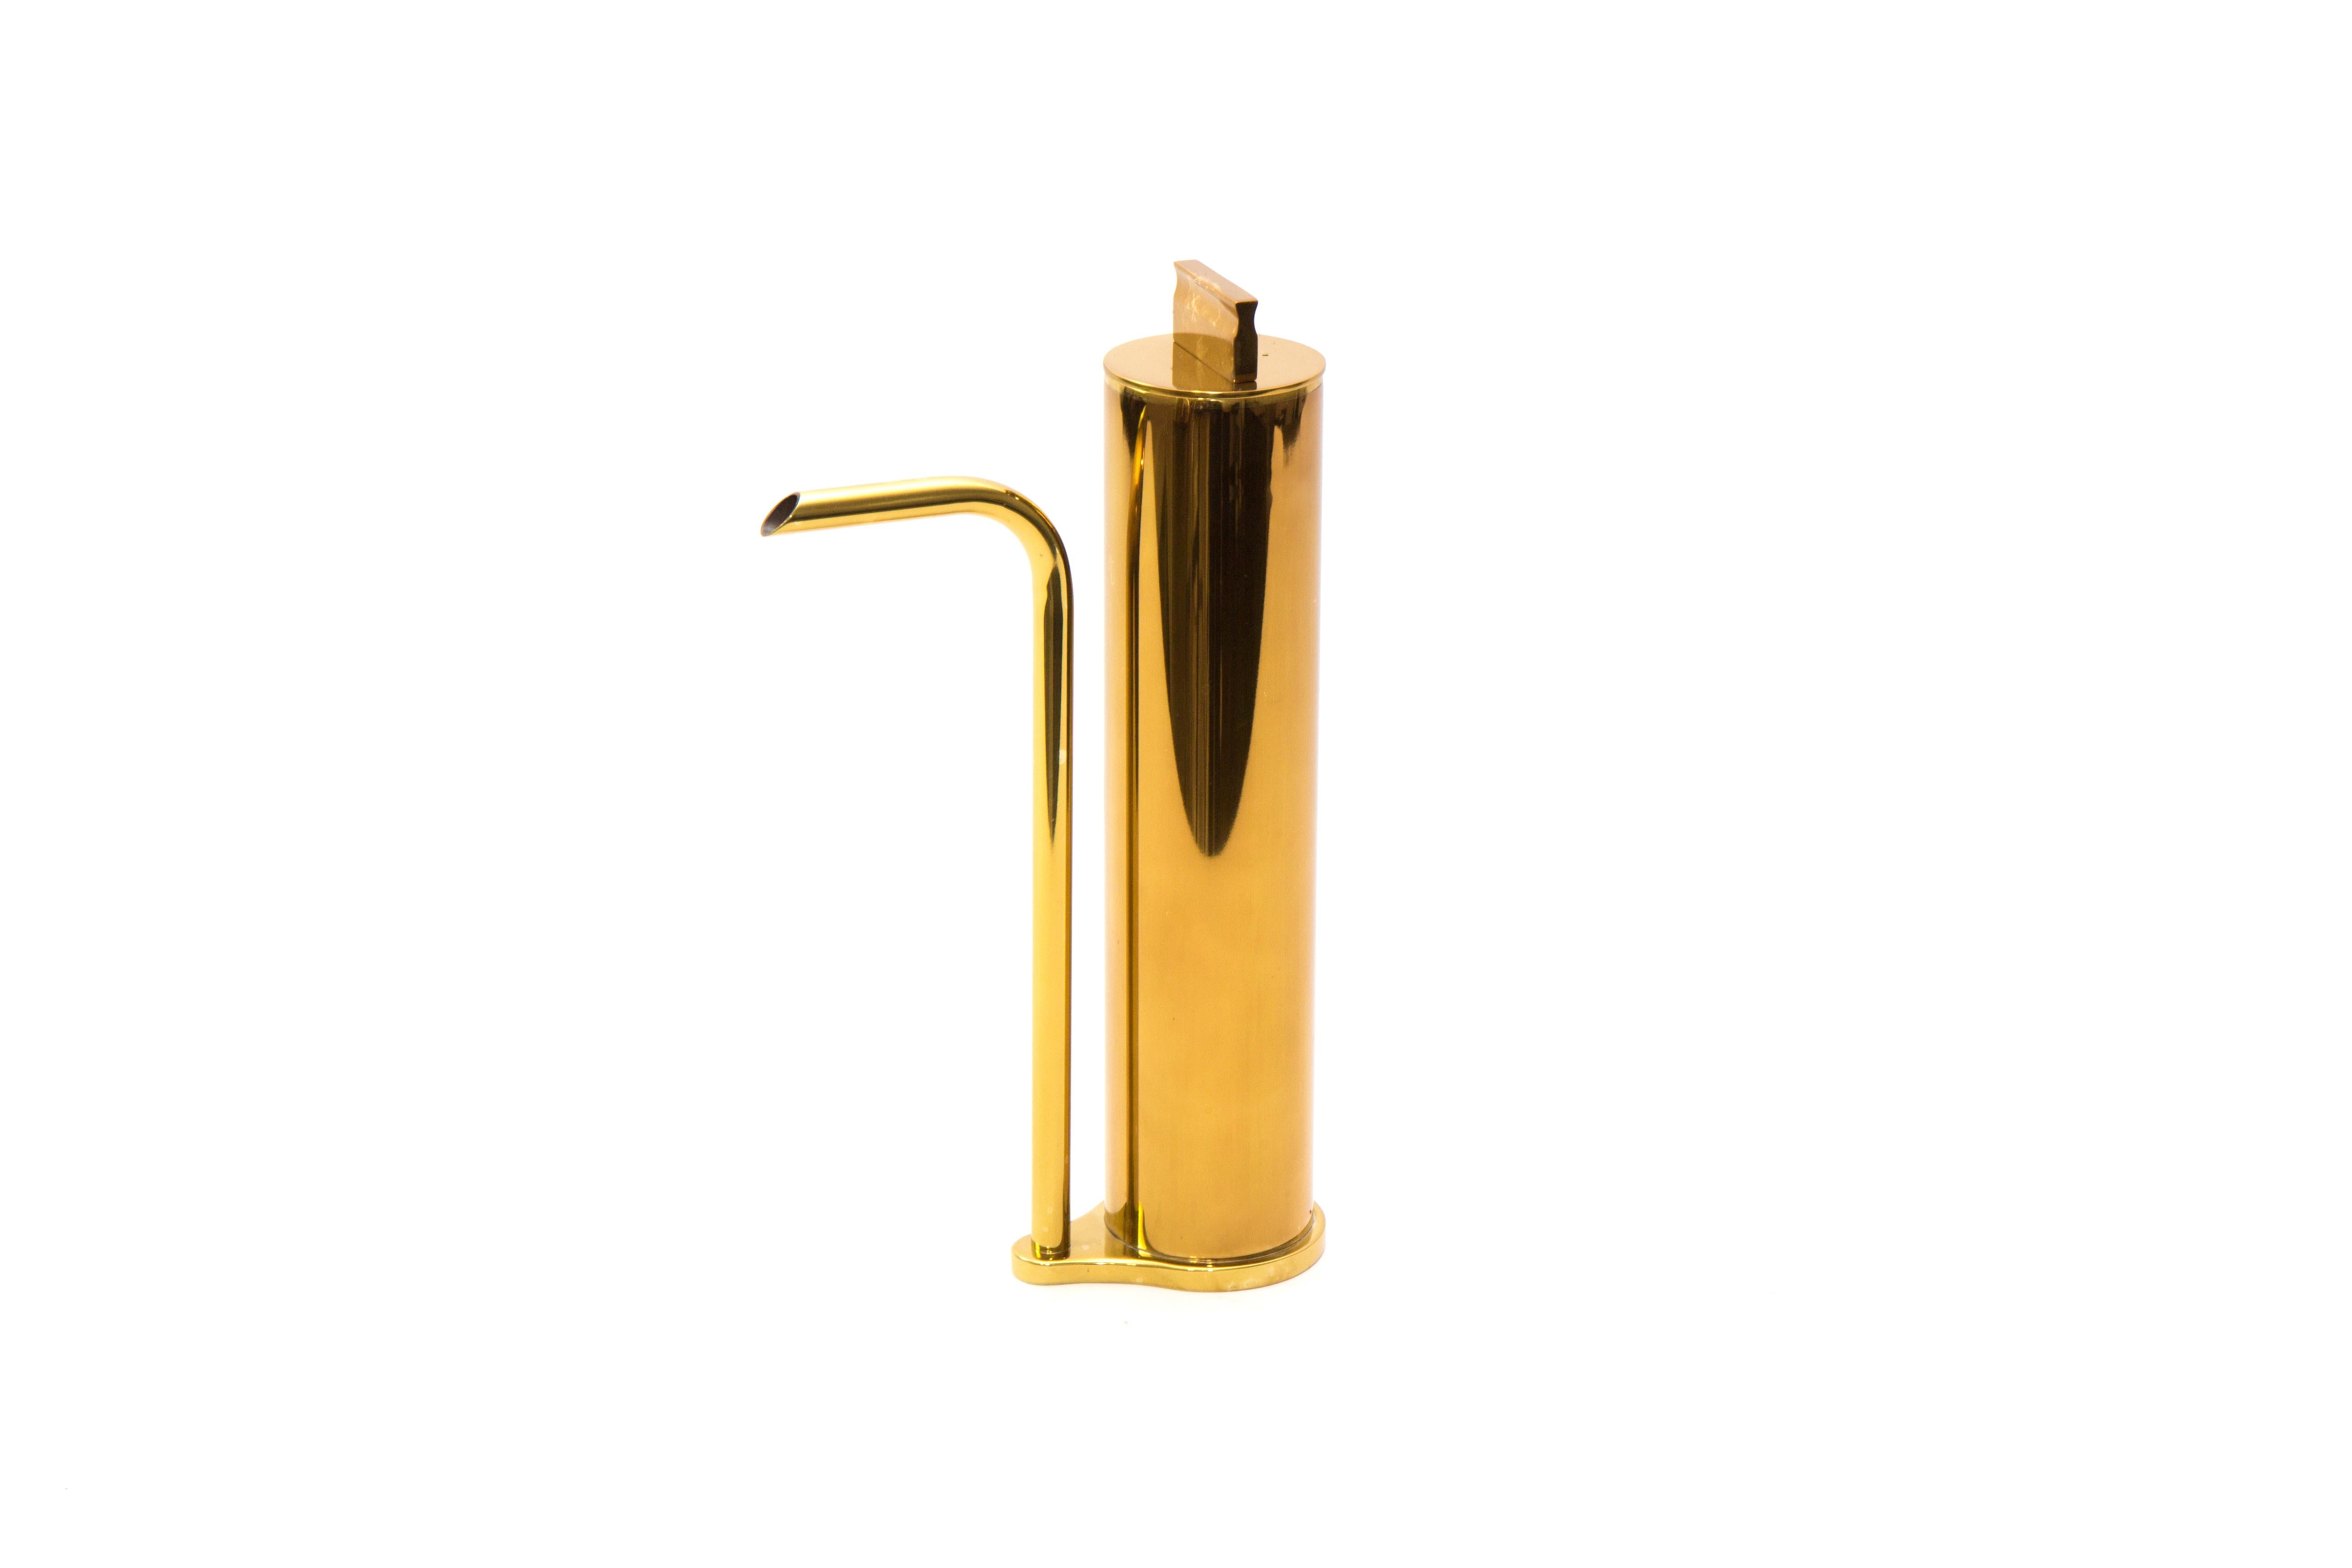 Brass oil decanter by Gentner Design
Dimensions: D 6.3 x W 10 x H 22.2 cm
Materials: polished tarnished brass

Made of brass and hand tarnished, the oil seems to magically move from the container to the spout without the two being connected. This